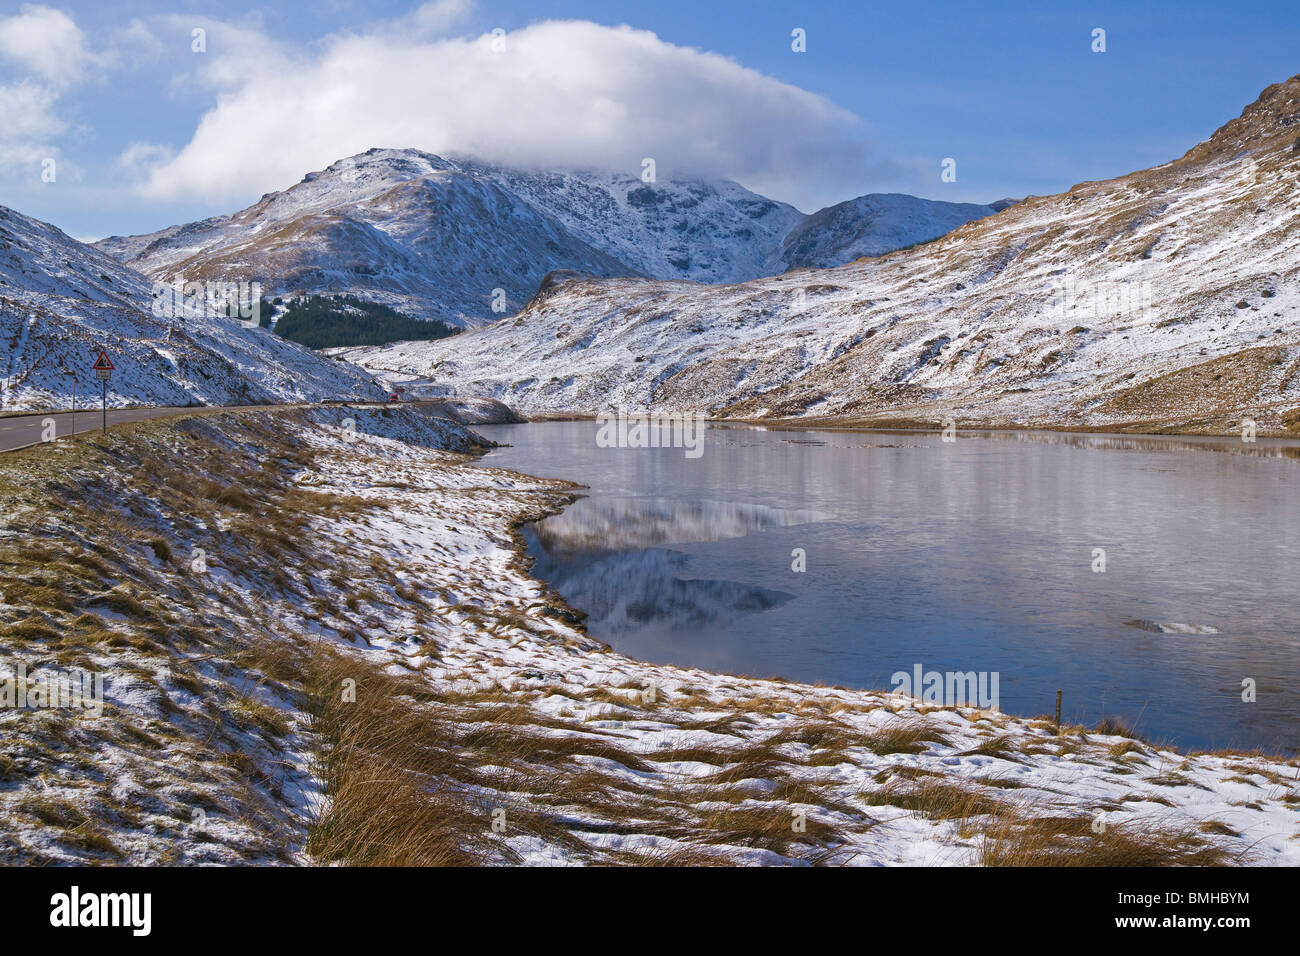 Snow and ice, Loch Restil, Rest and be thankful, Arrachar, Argyll, Scotland Stock Photo